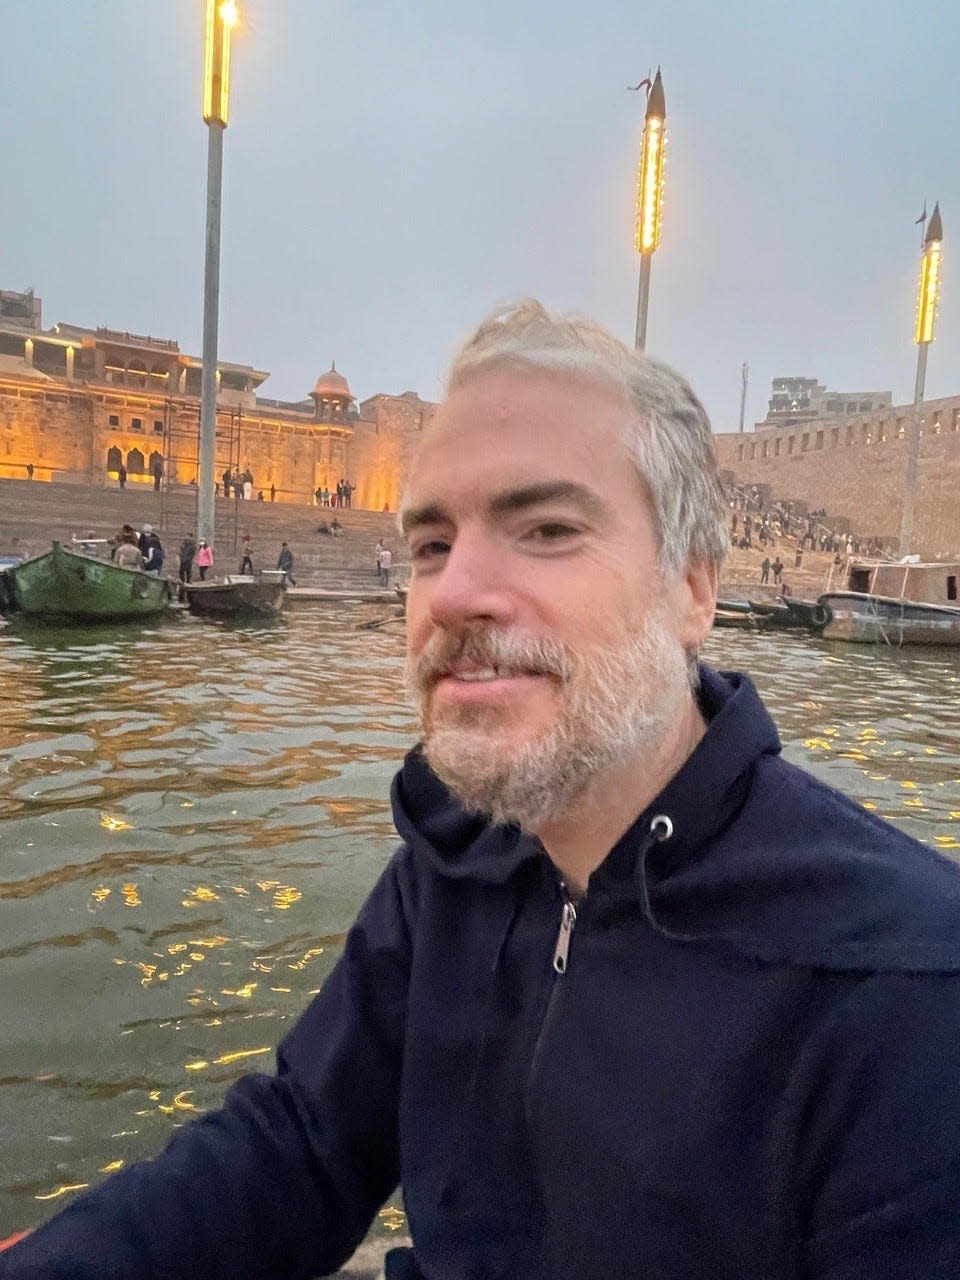 Brian Collins in Varanasi, the sacred city of Shiva. Every sunrise and sunset, priests make offerings to the river with large oil lamps. "It just goes to show how frequently lamps are used in Hindu practices, even outside of Diwali." Collins said.